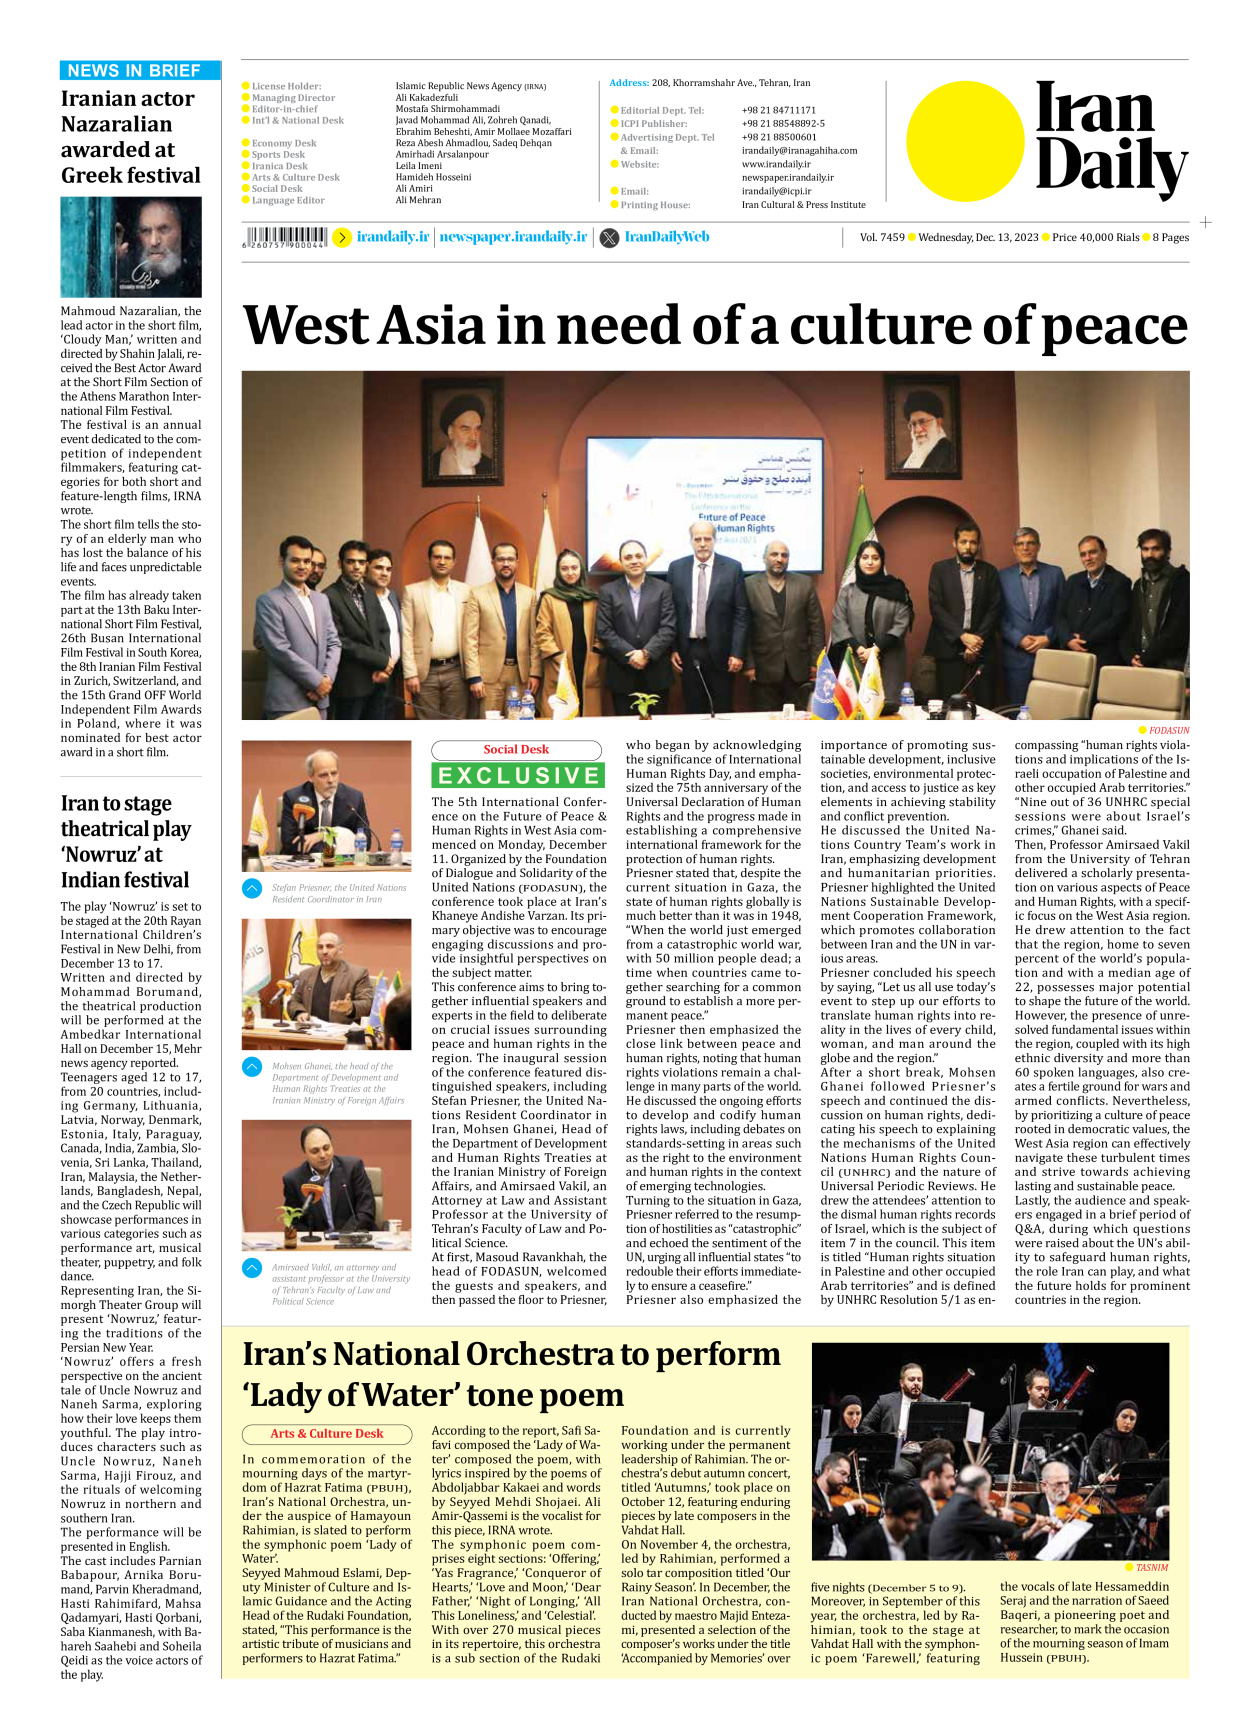 Iran Daily - Number Seven Thousand Four Hundred and Fifty Nine - 13 December 2023 - Page 8